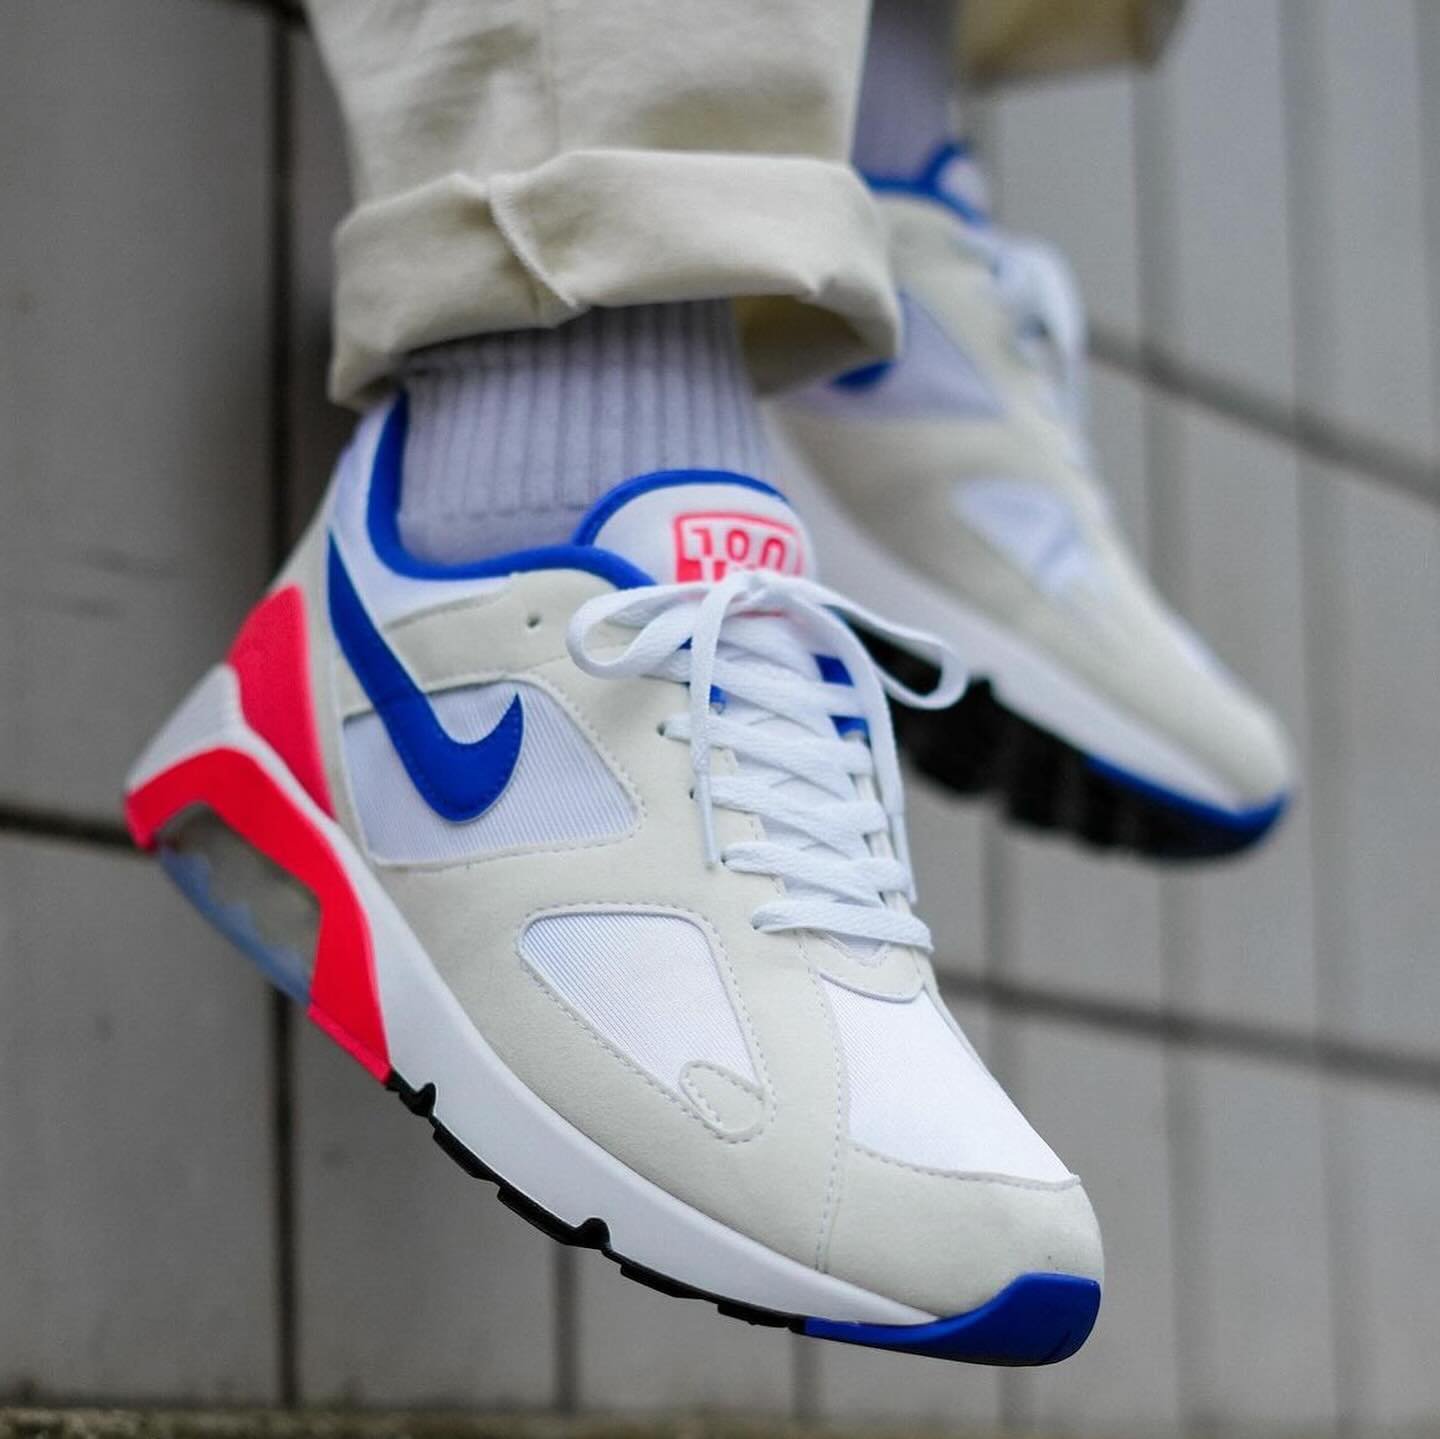 Nike&rsquo;s Air Max 180 &lsquo;Ultramarine&rsquo; returns for a 2024 retro 🤩

Tap the product tag to view and enter all the live draws and enable drop alerts 🔔

Who&rsquo;s looking forward to picking a pair up? 

#SneakerSpott #AirMax180